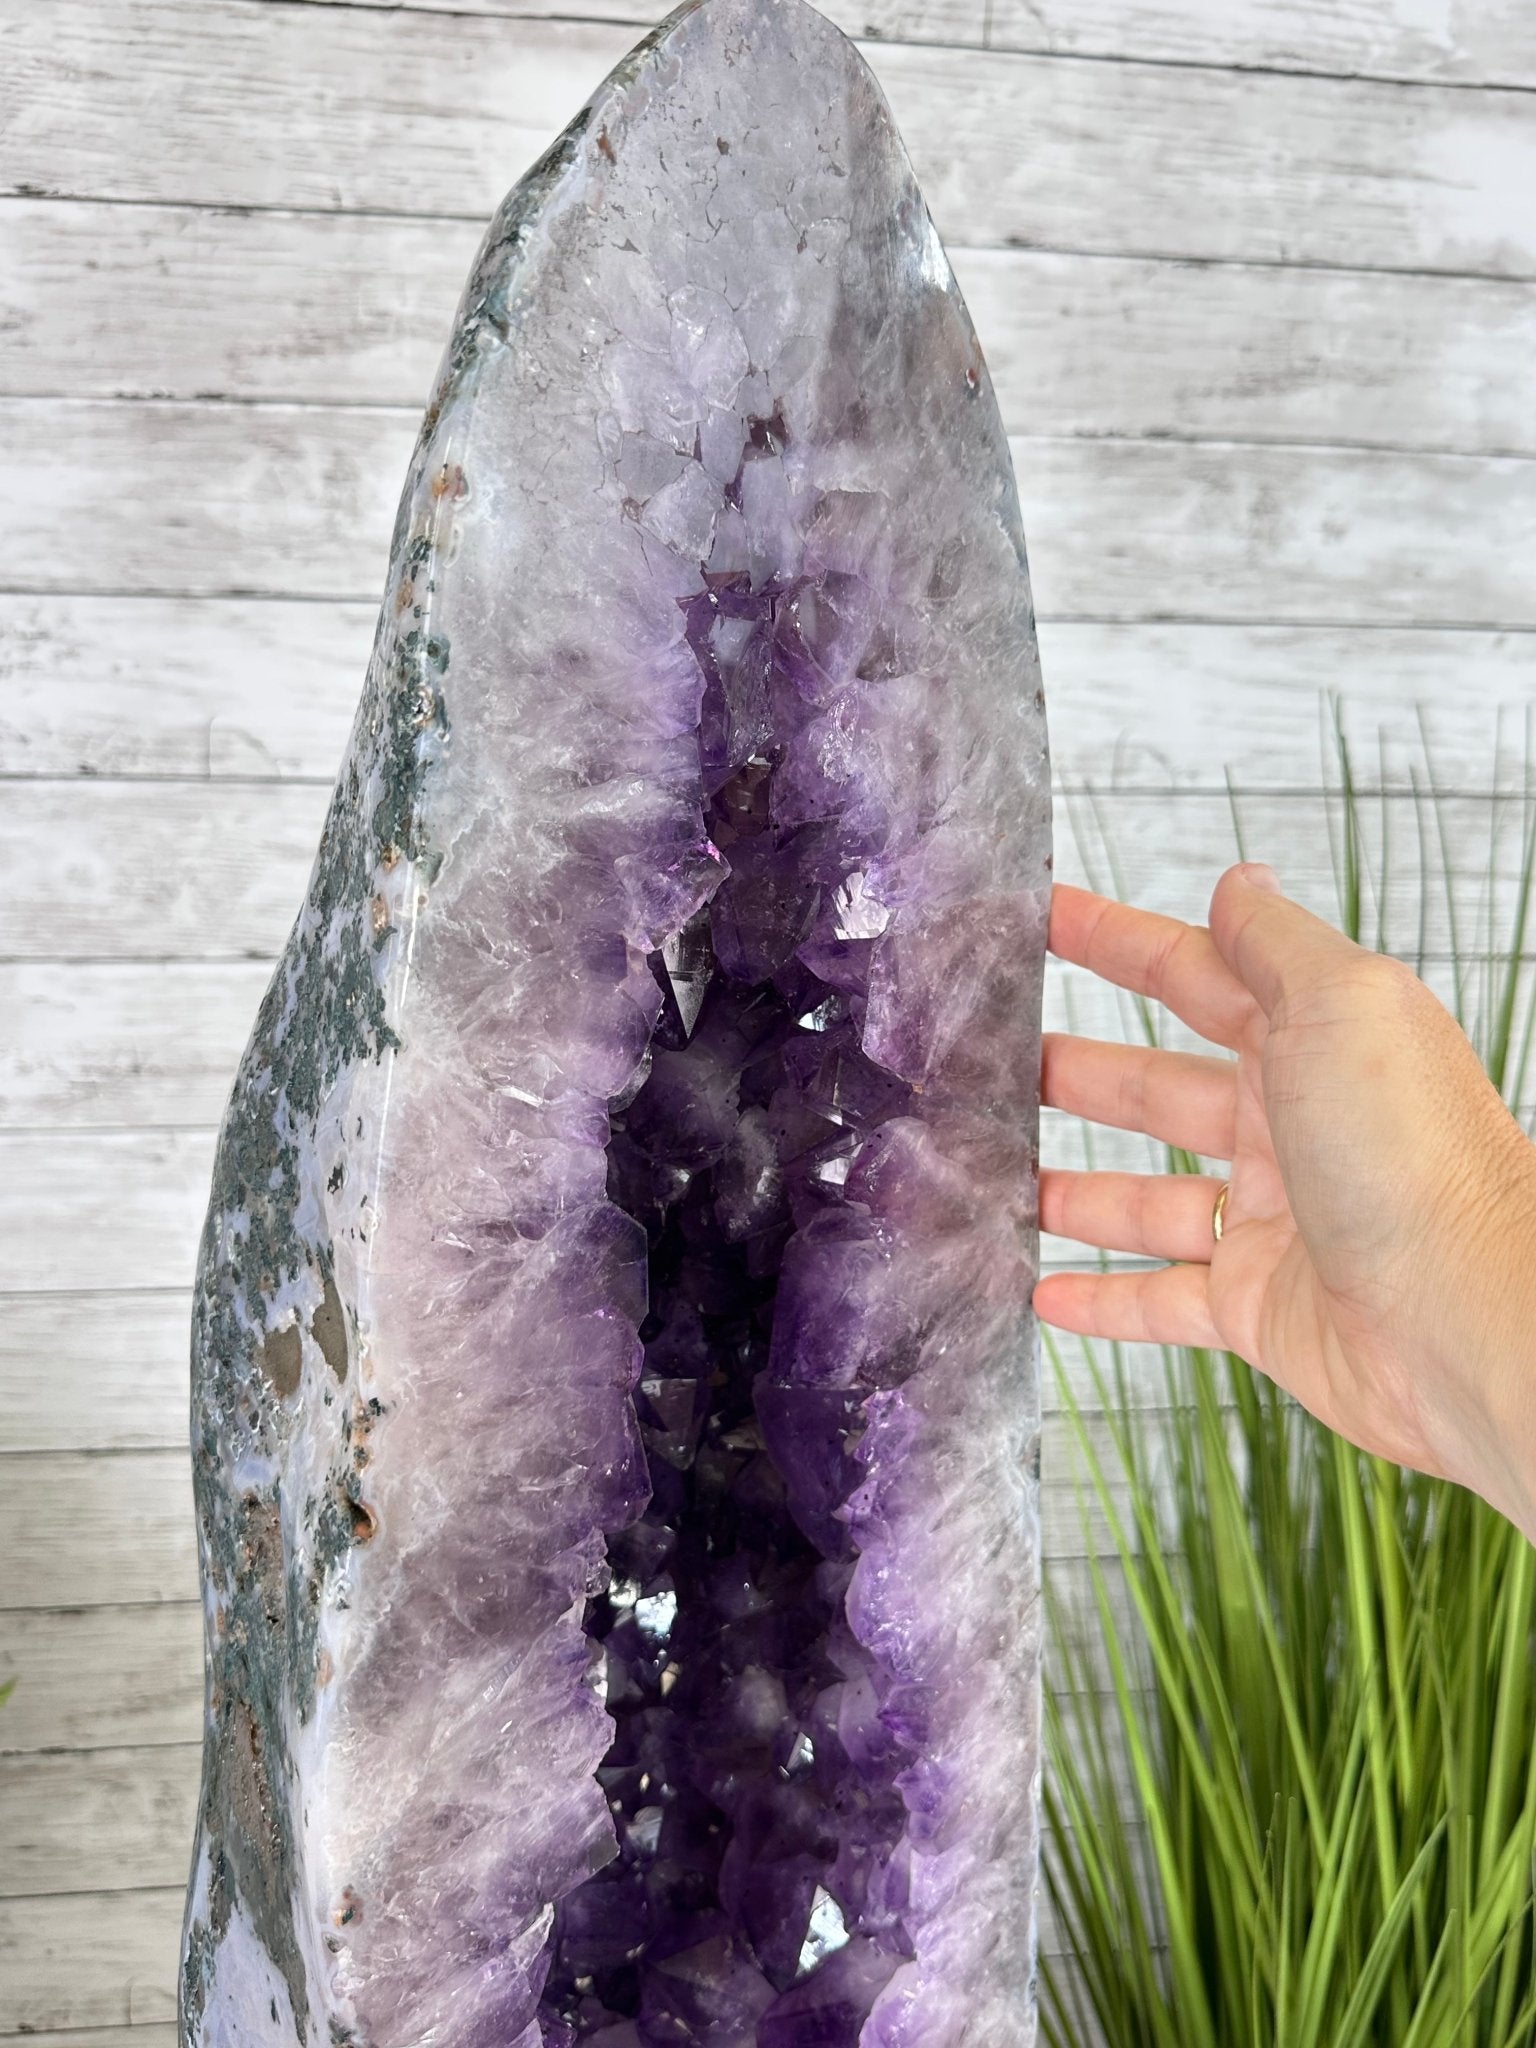 Extra Plus Quality Polished Brazilian Amethyst Cathedral, 90.7 lbs & 32.75" tall Model #5602-0137 by Brazil Gems - Brazil GemsBrazil GemsExtra Plus Quality Polished Brazilian Amethyst Cathedral, 90.7 lbs & 32.75" tall Model #5602-0137 by Brazil GemsPolished Cathedrals5602-0137